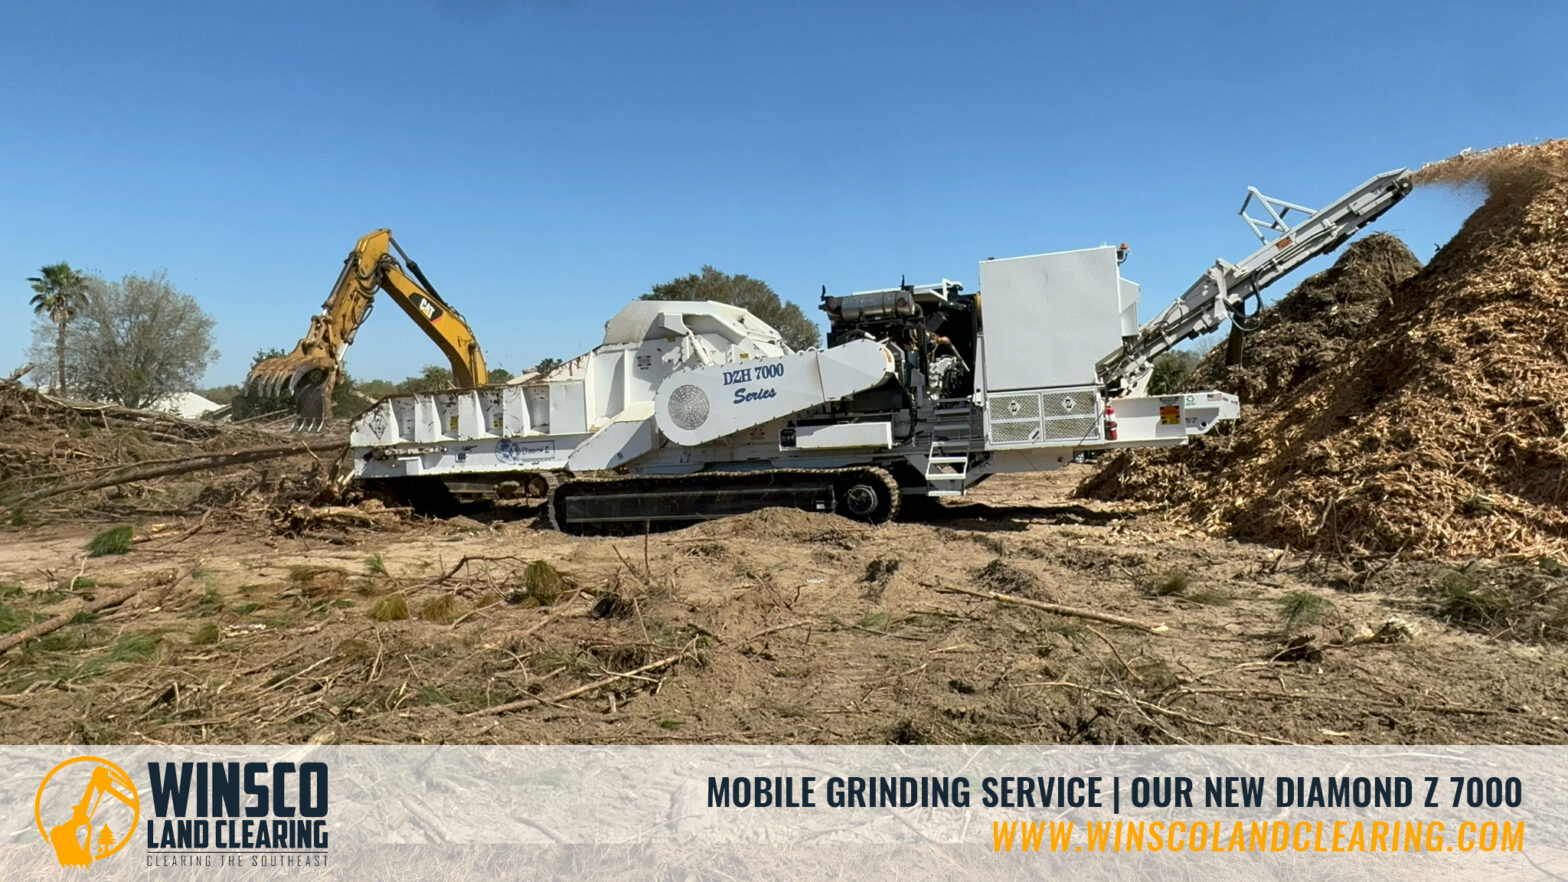 Mobile Grinding Service